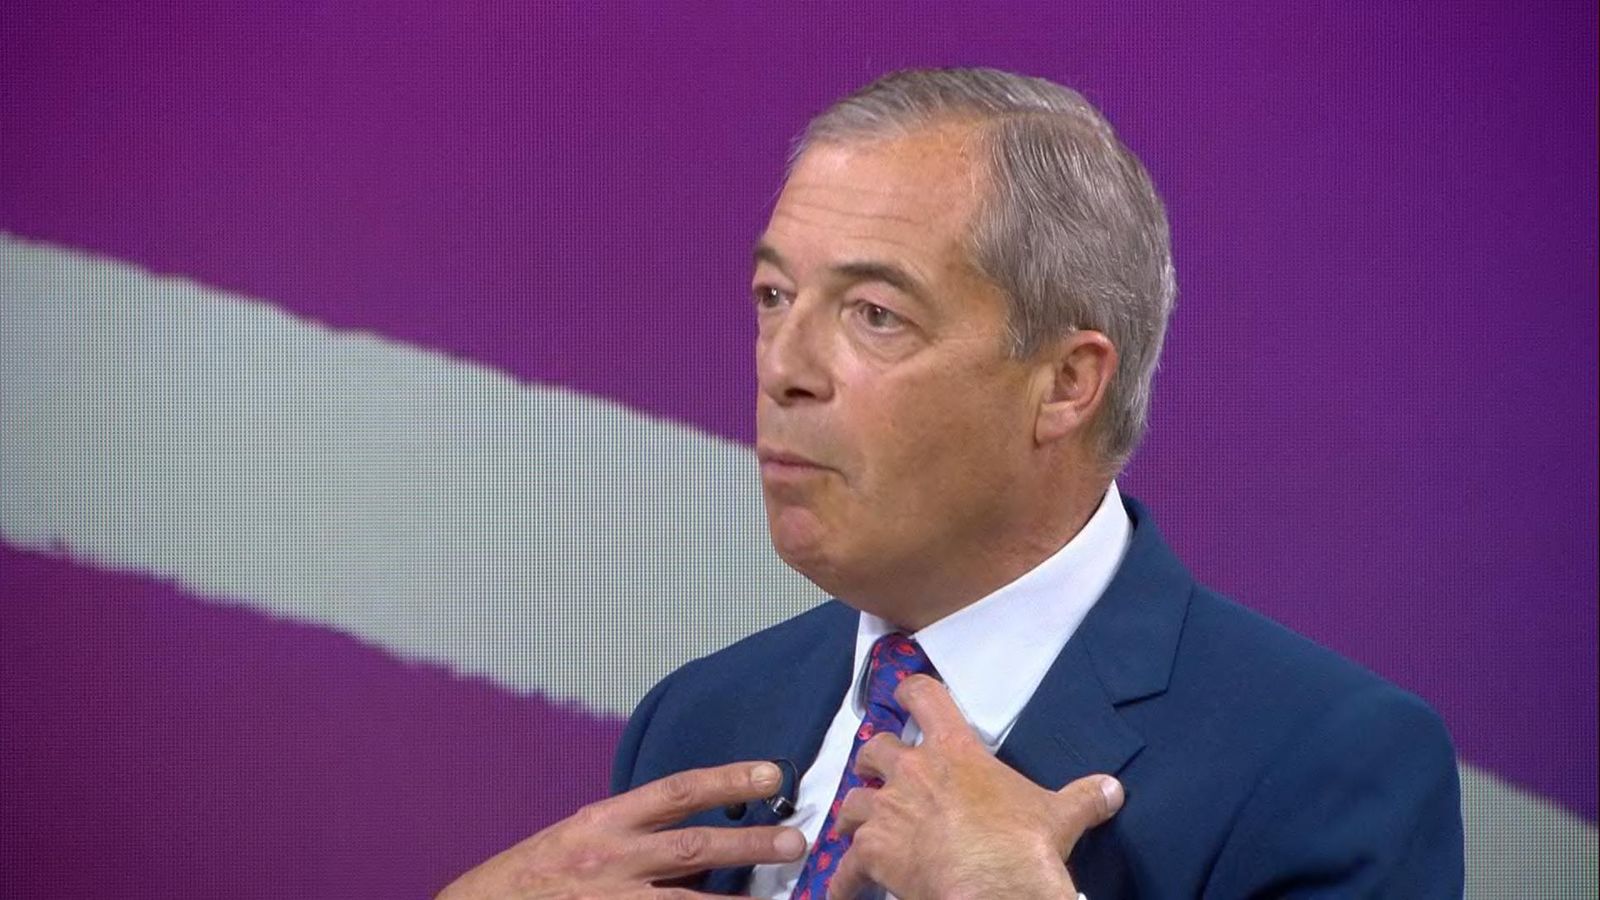 Nigel Farage tells Beth Rigby the Tories have 'betrayed' Brexit and should accept worker shortages to cut immigration